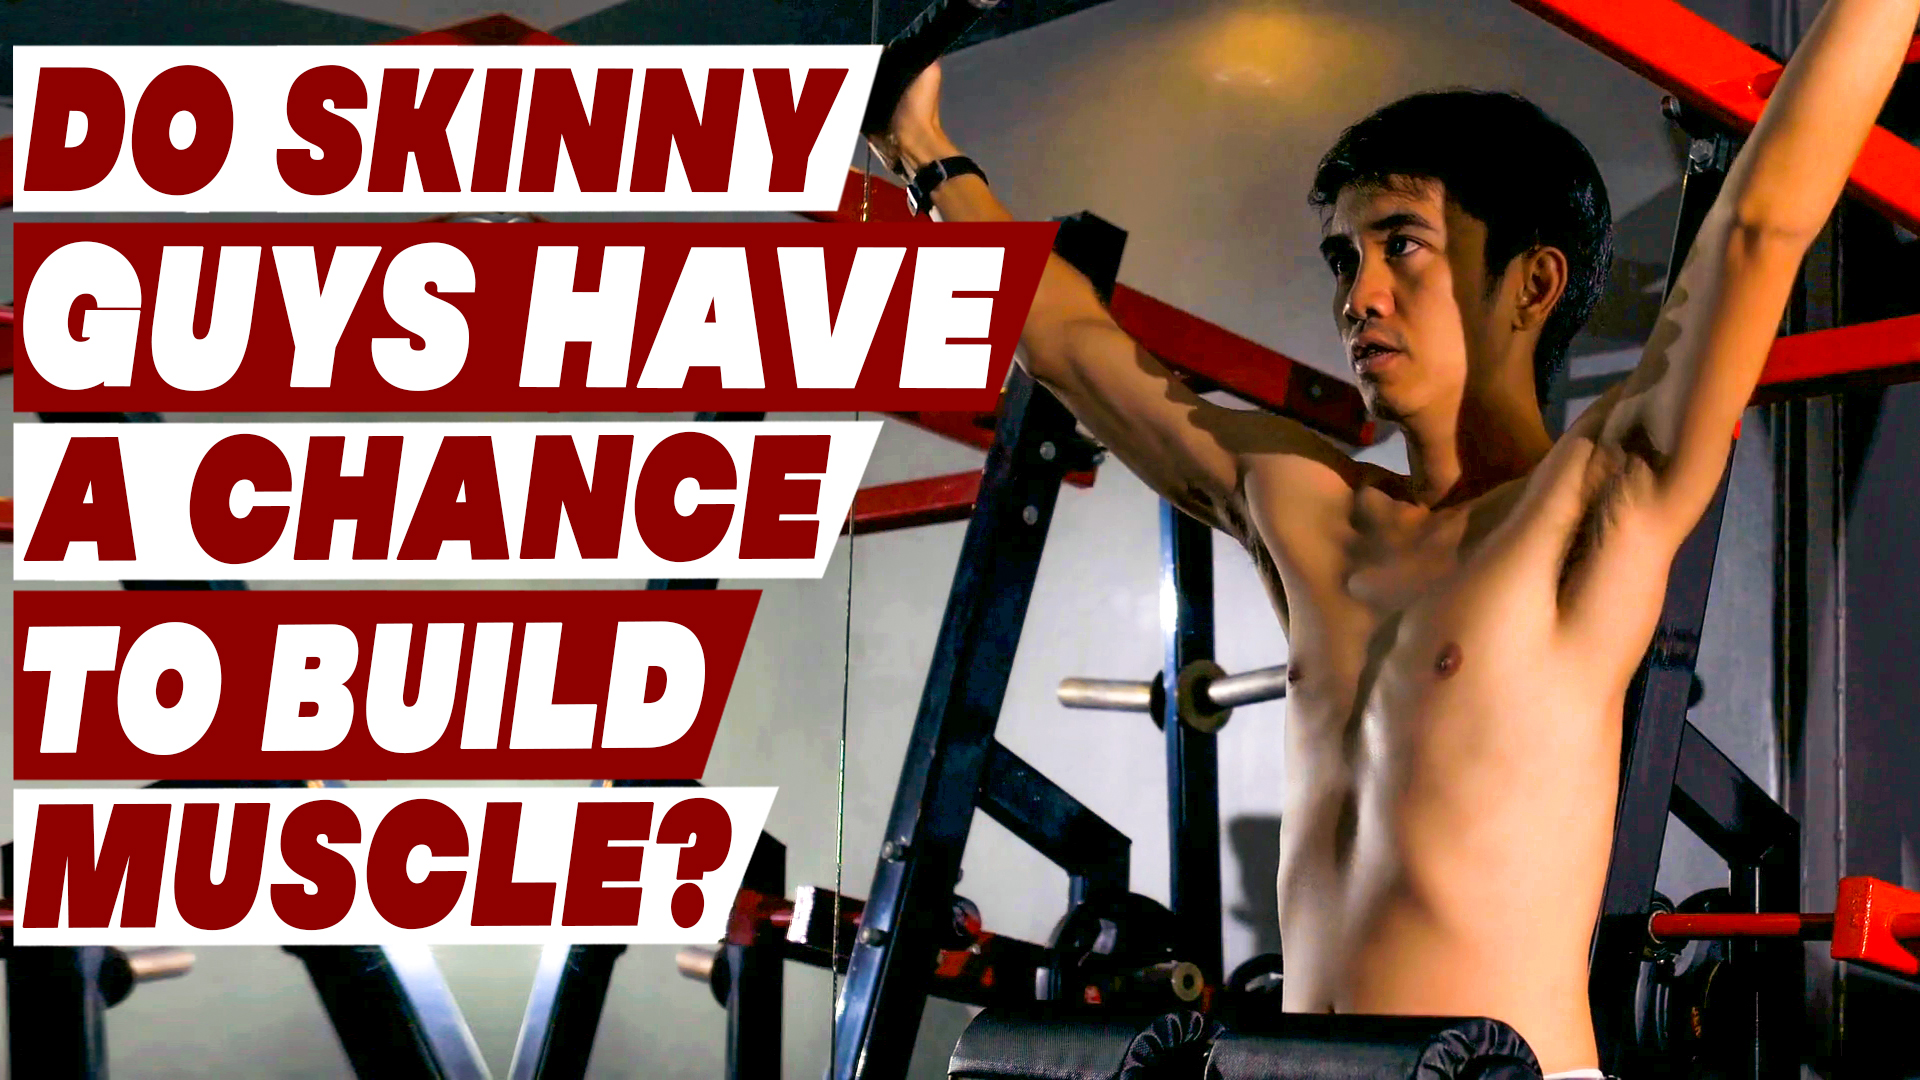 Do Skinny Guys Have a Chance to Build Muscle?